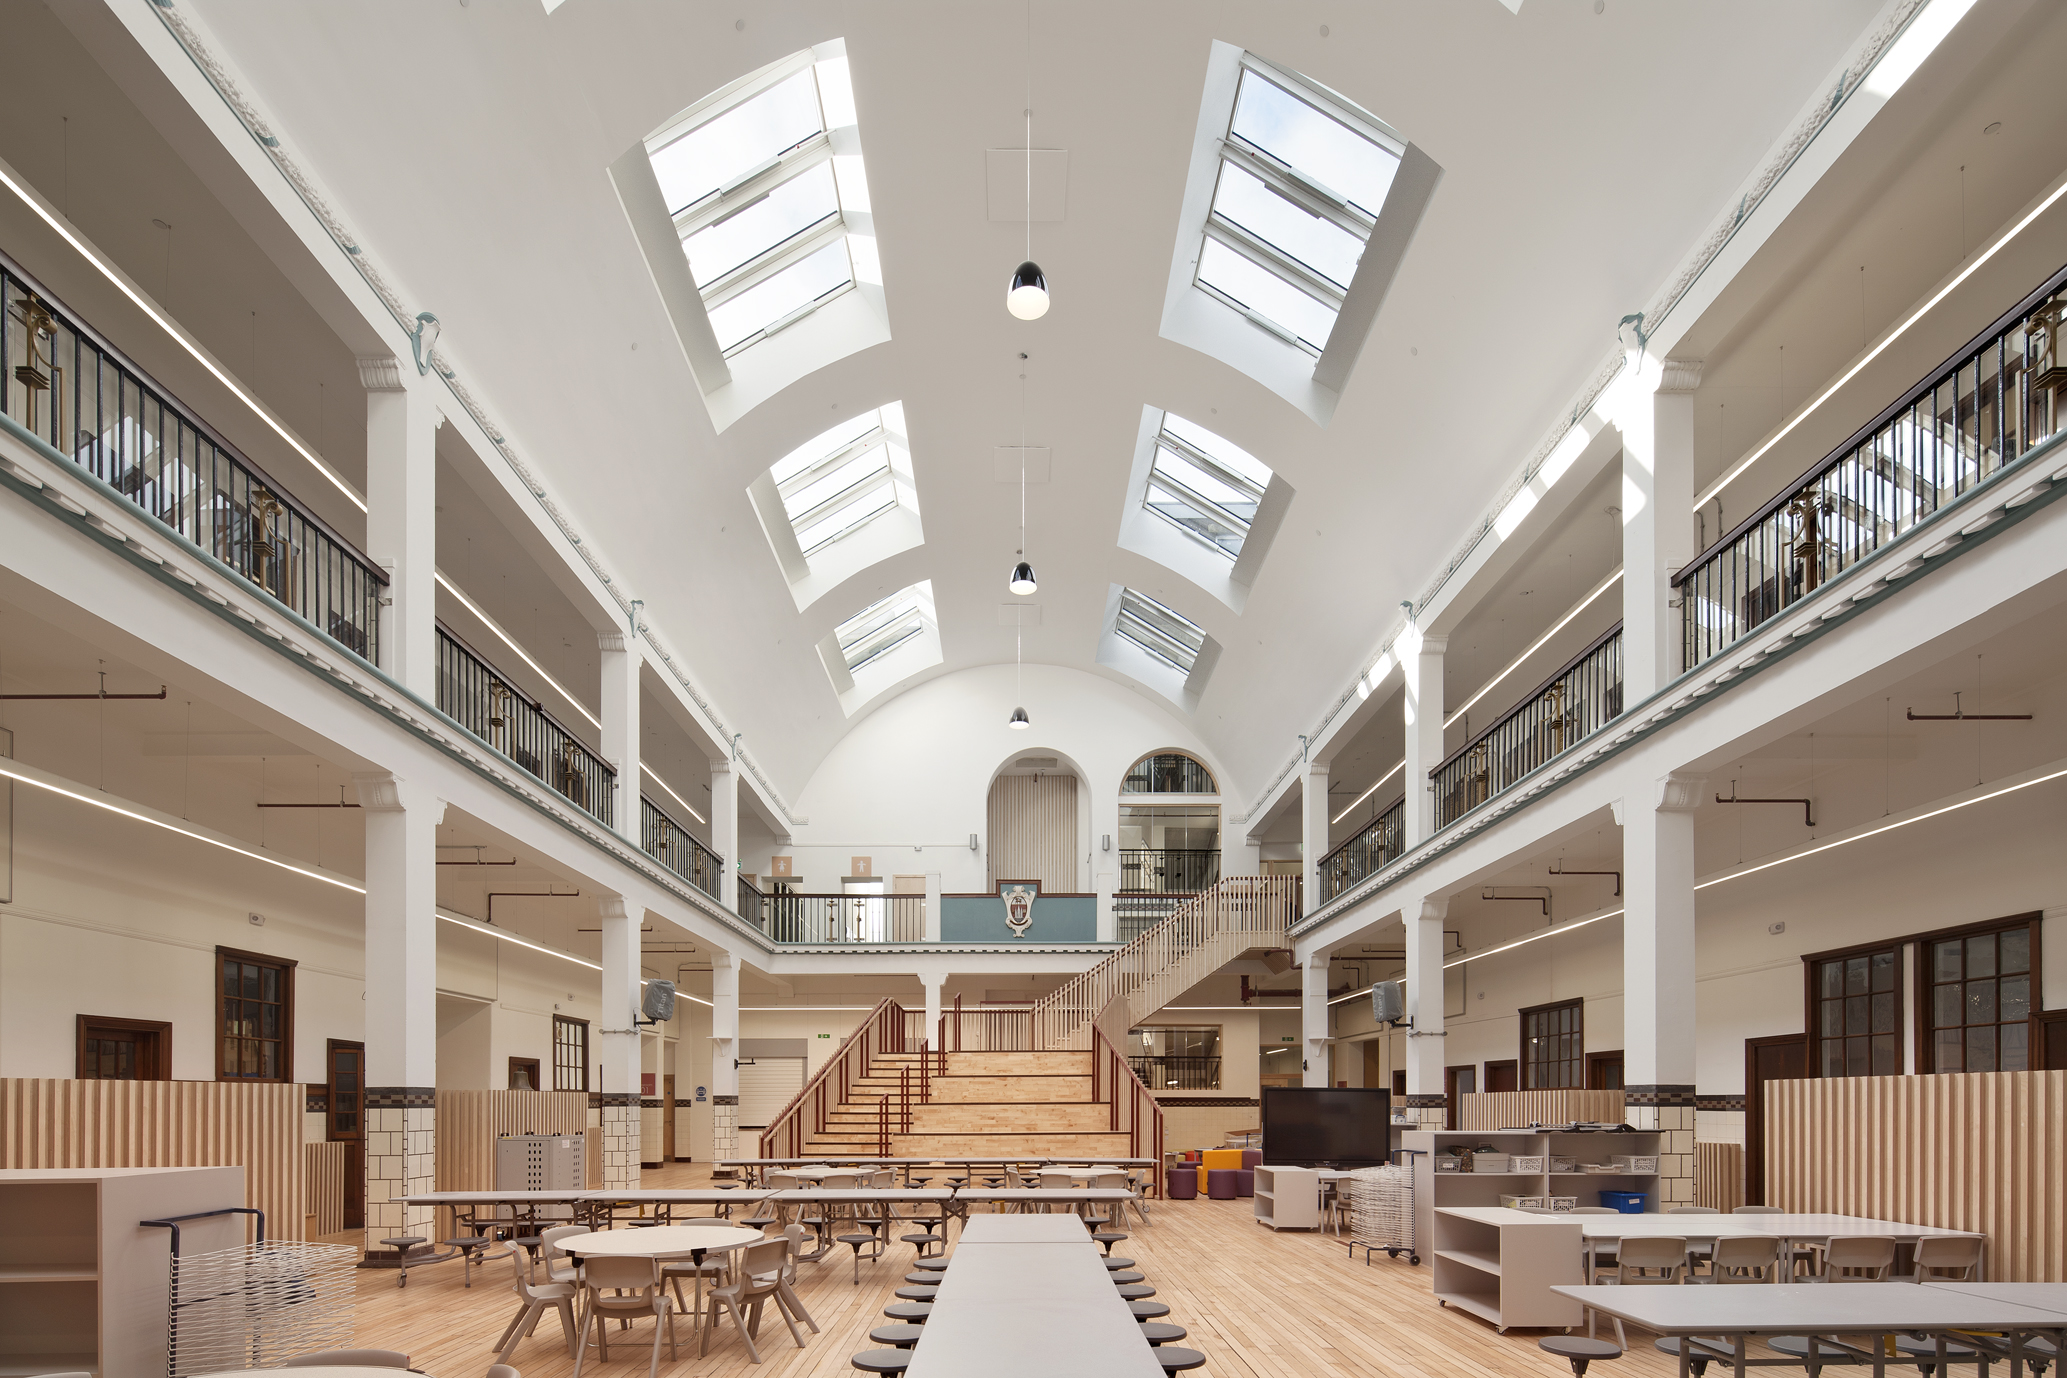 Deanestor fits out award-winning primary school and community campus